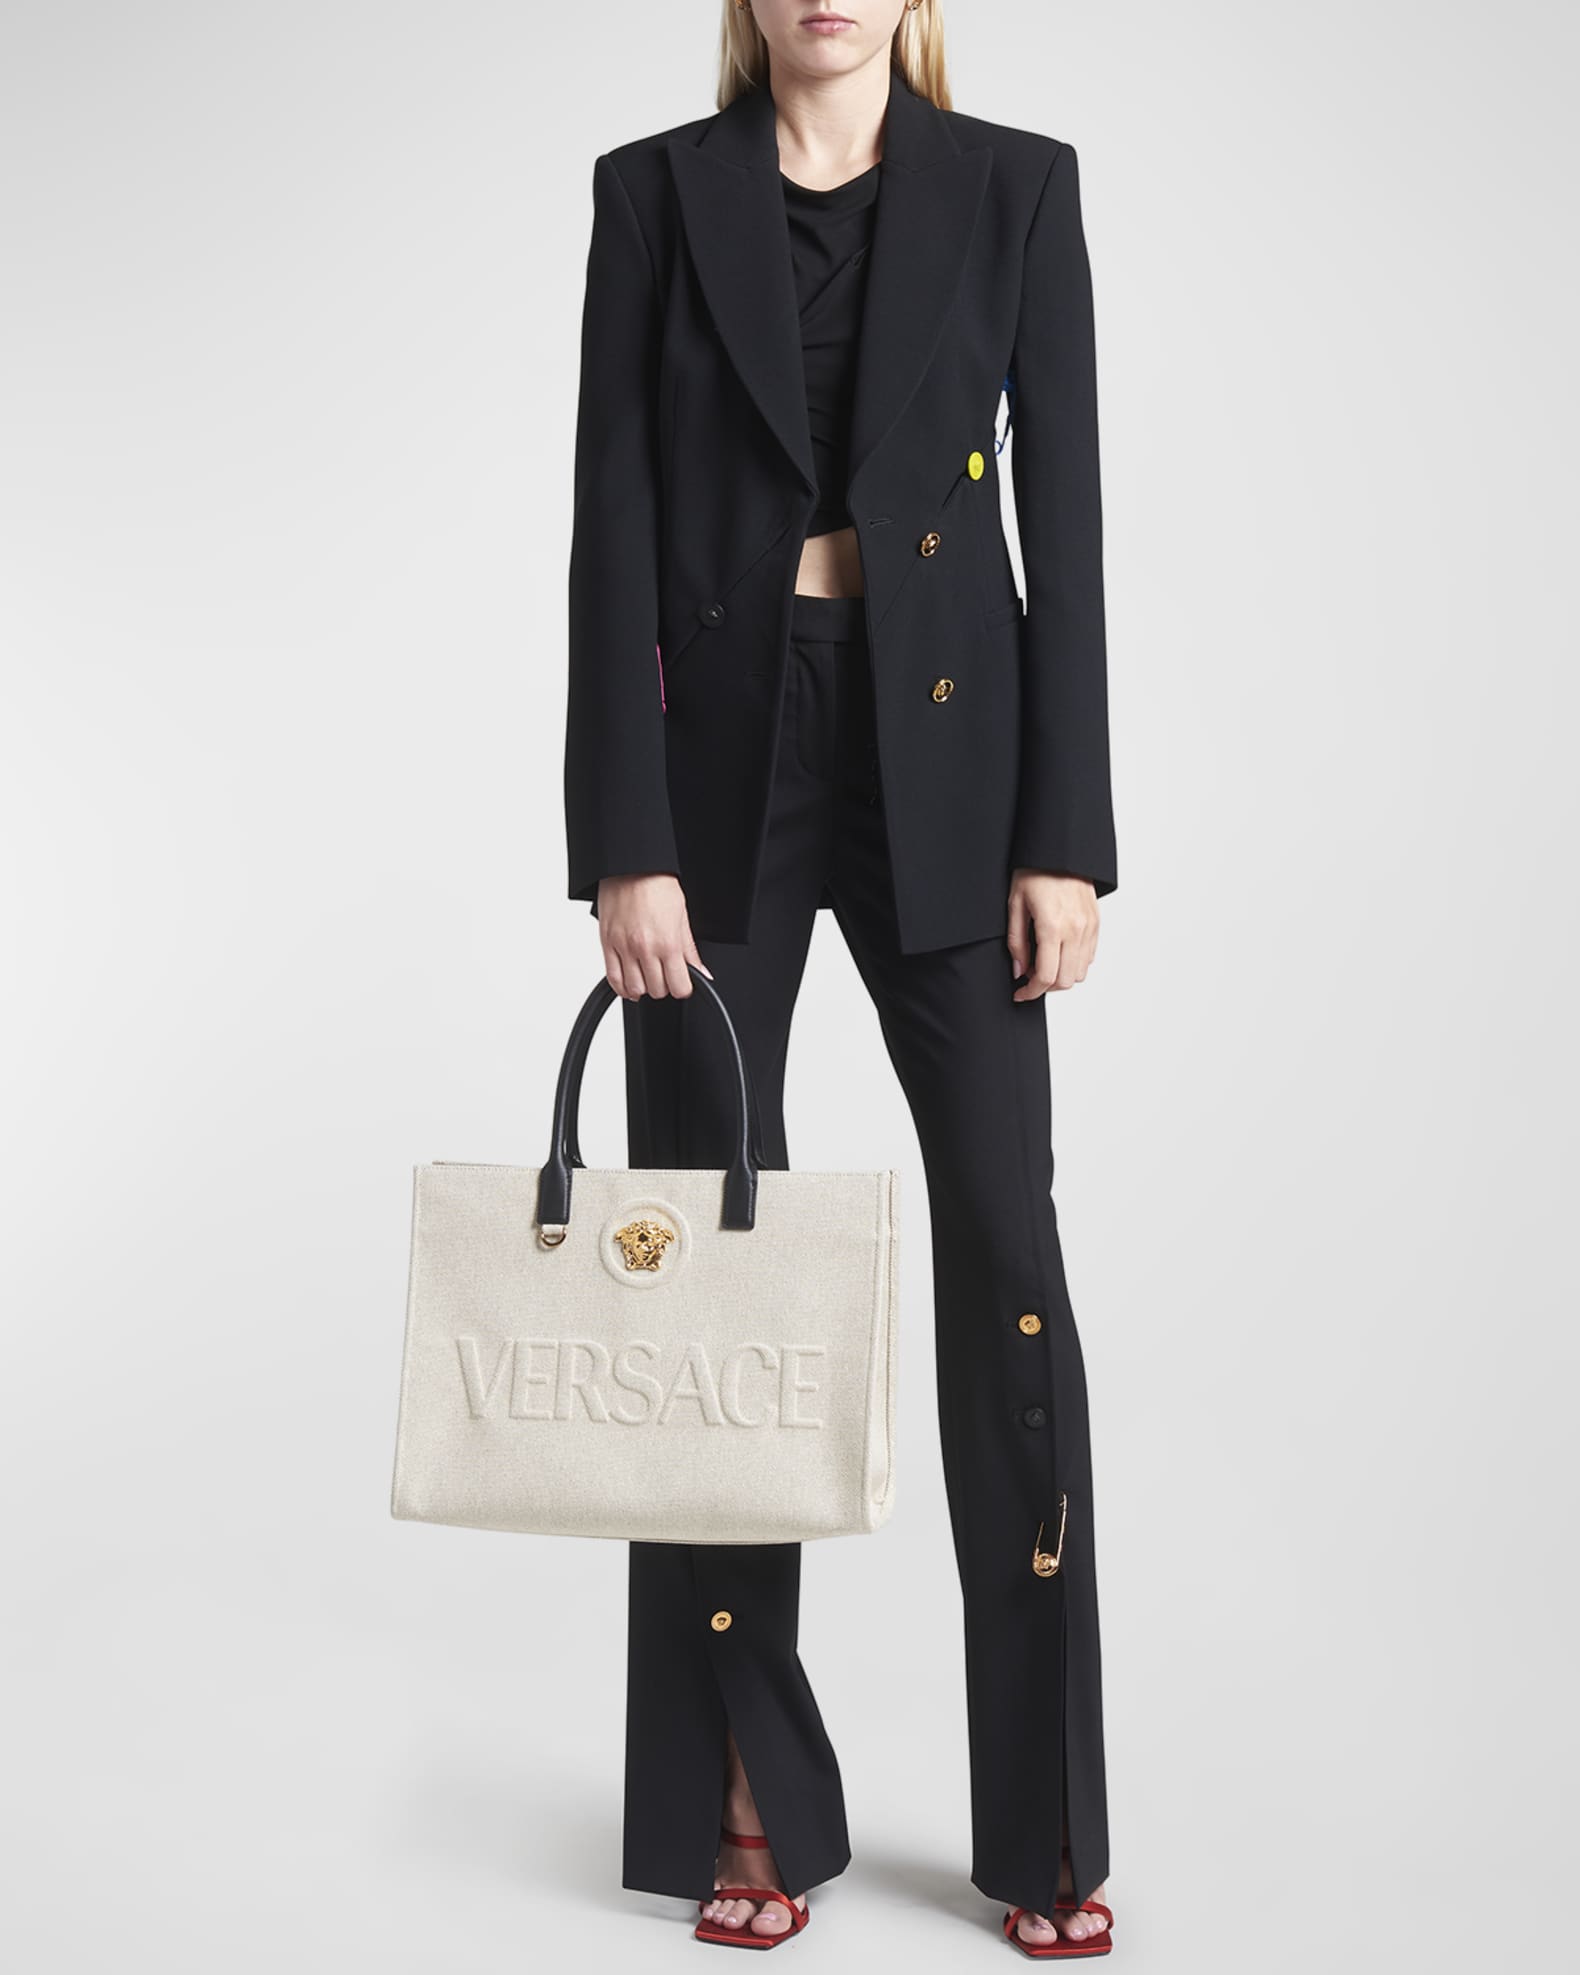 Versace Medusa Coated Canvas Tote - ShopStyle